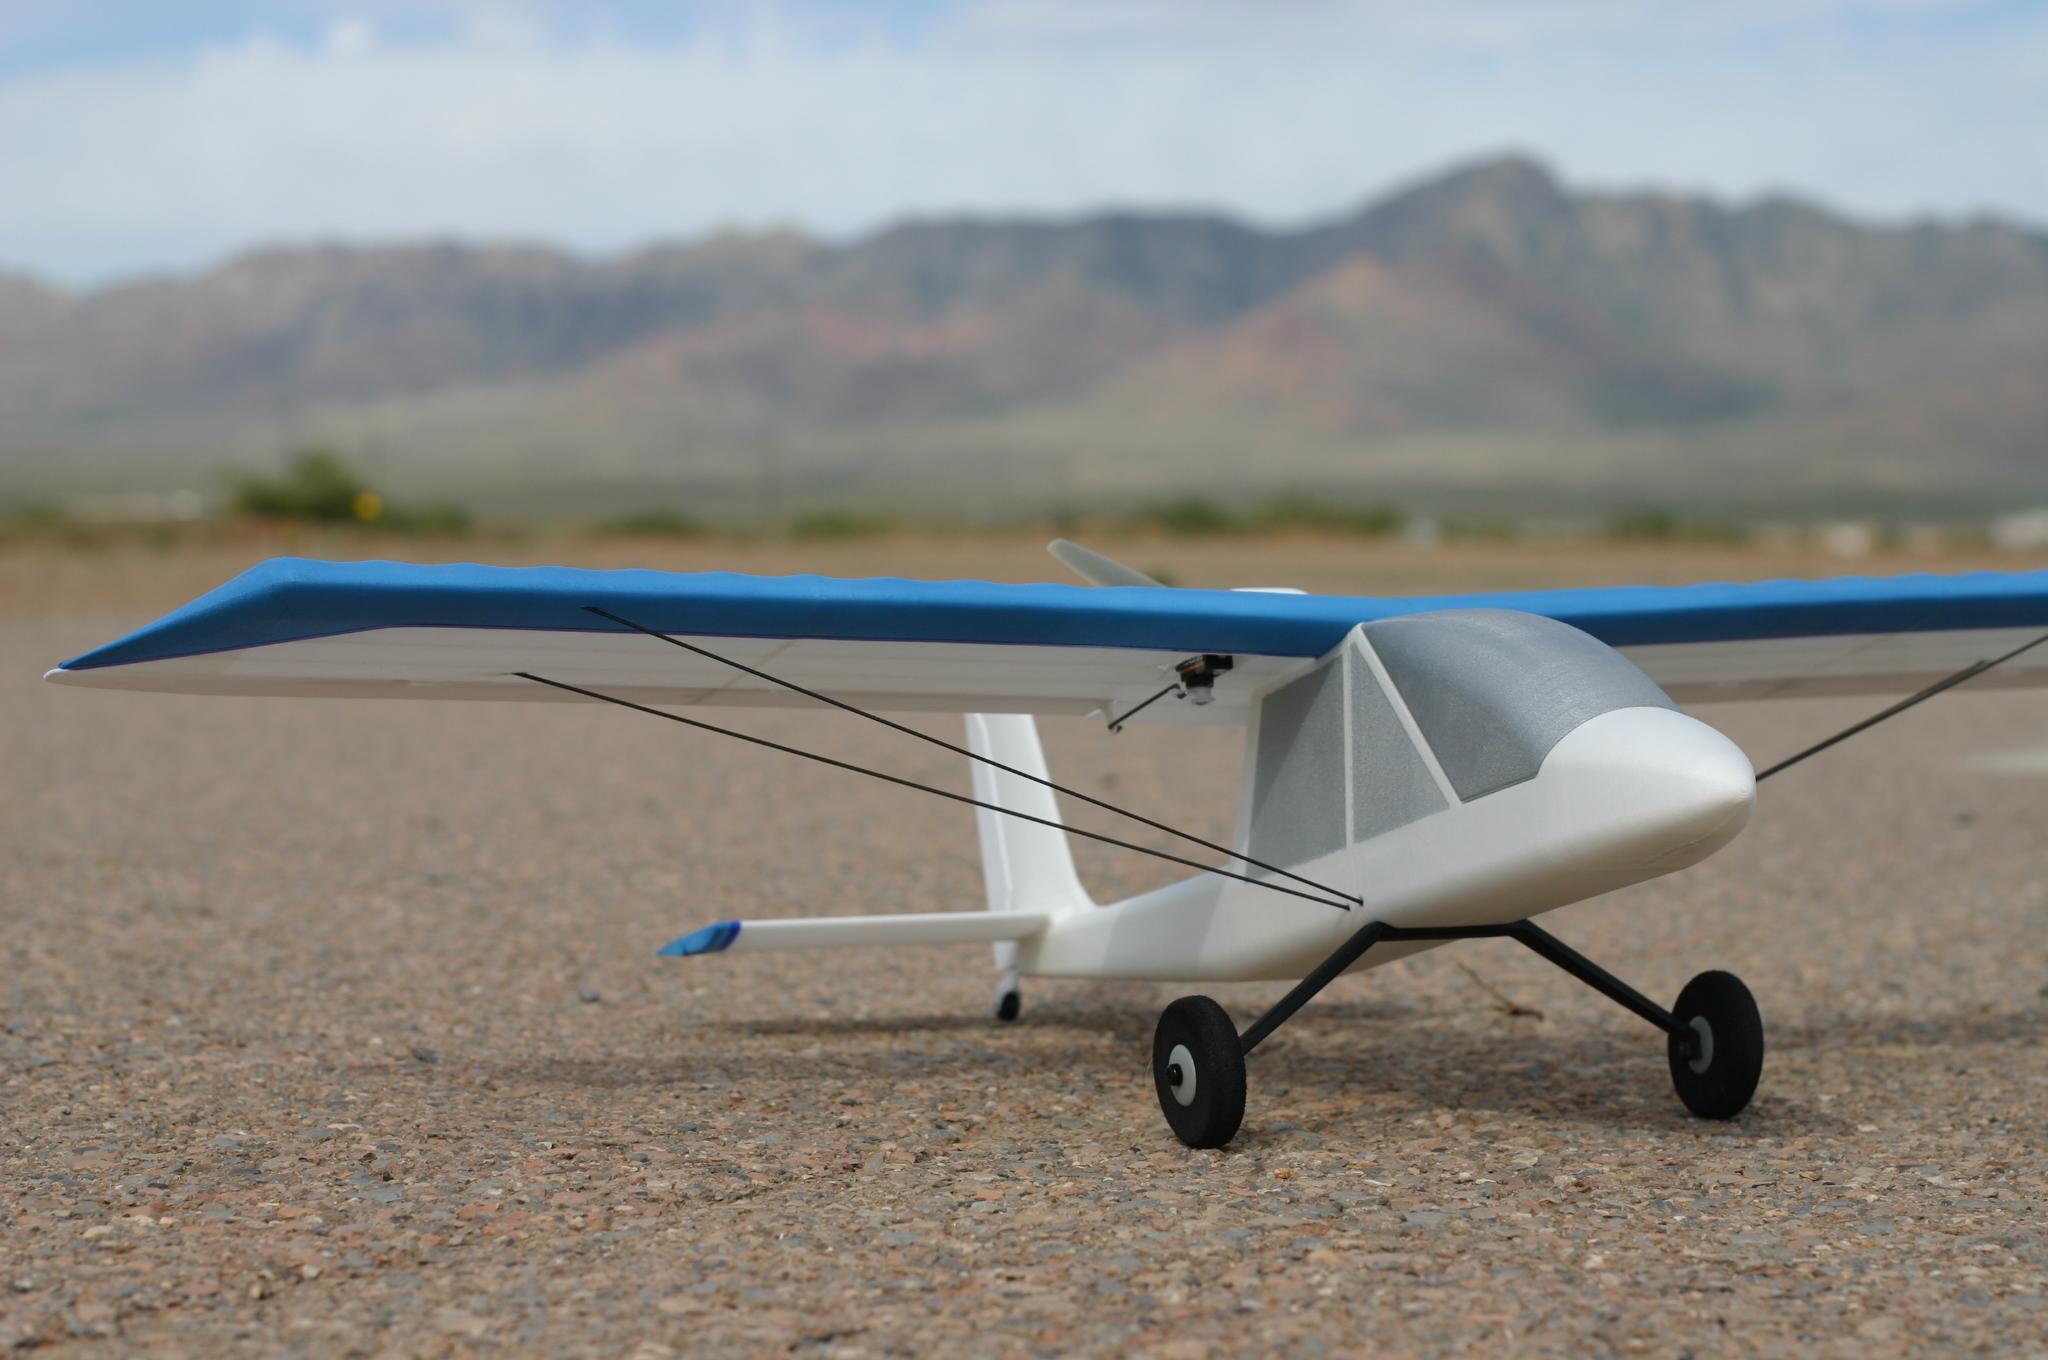 Indoor Rc Airplane: Exploring the World of Indoor RC Airplanes